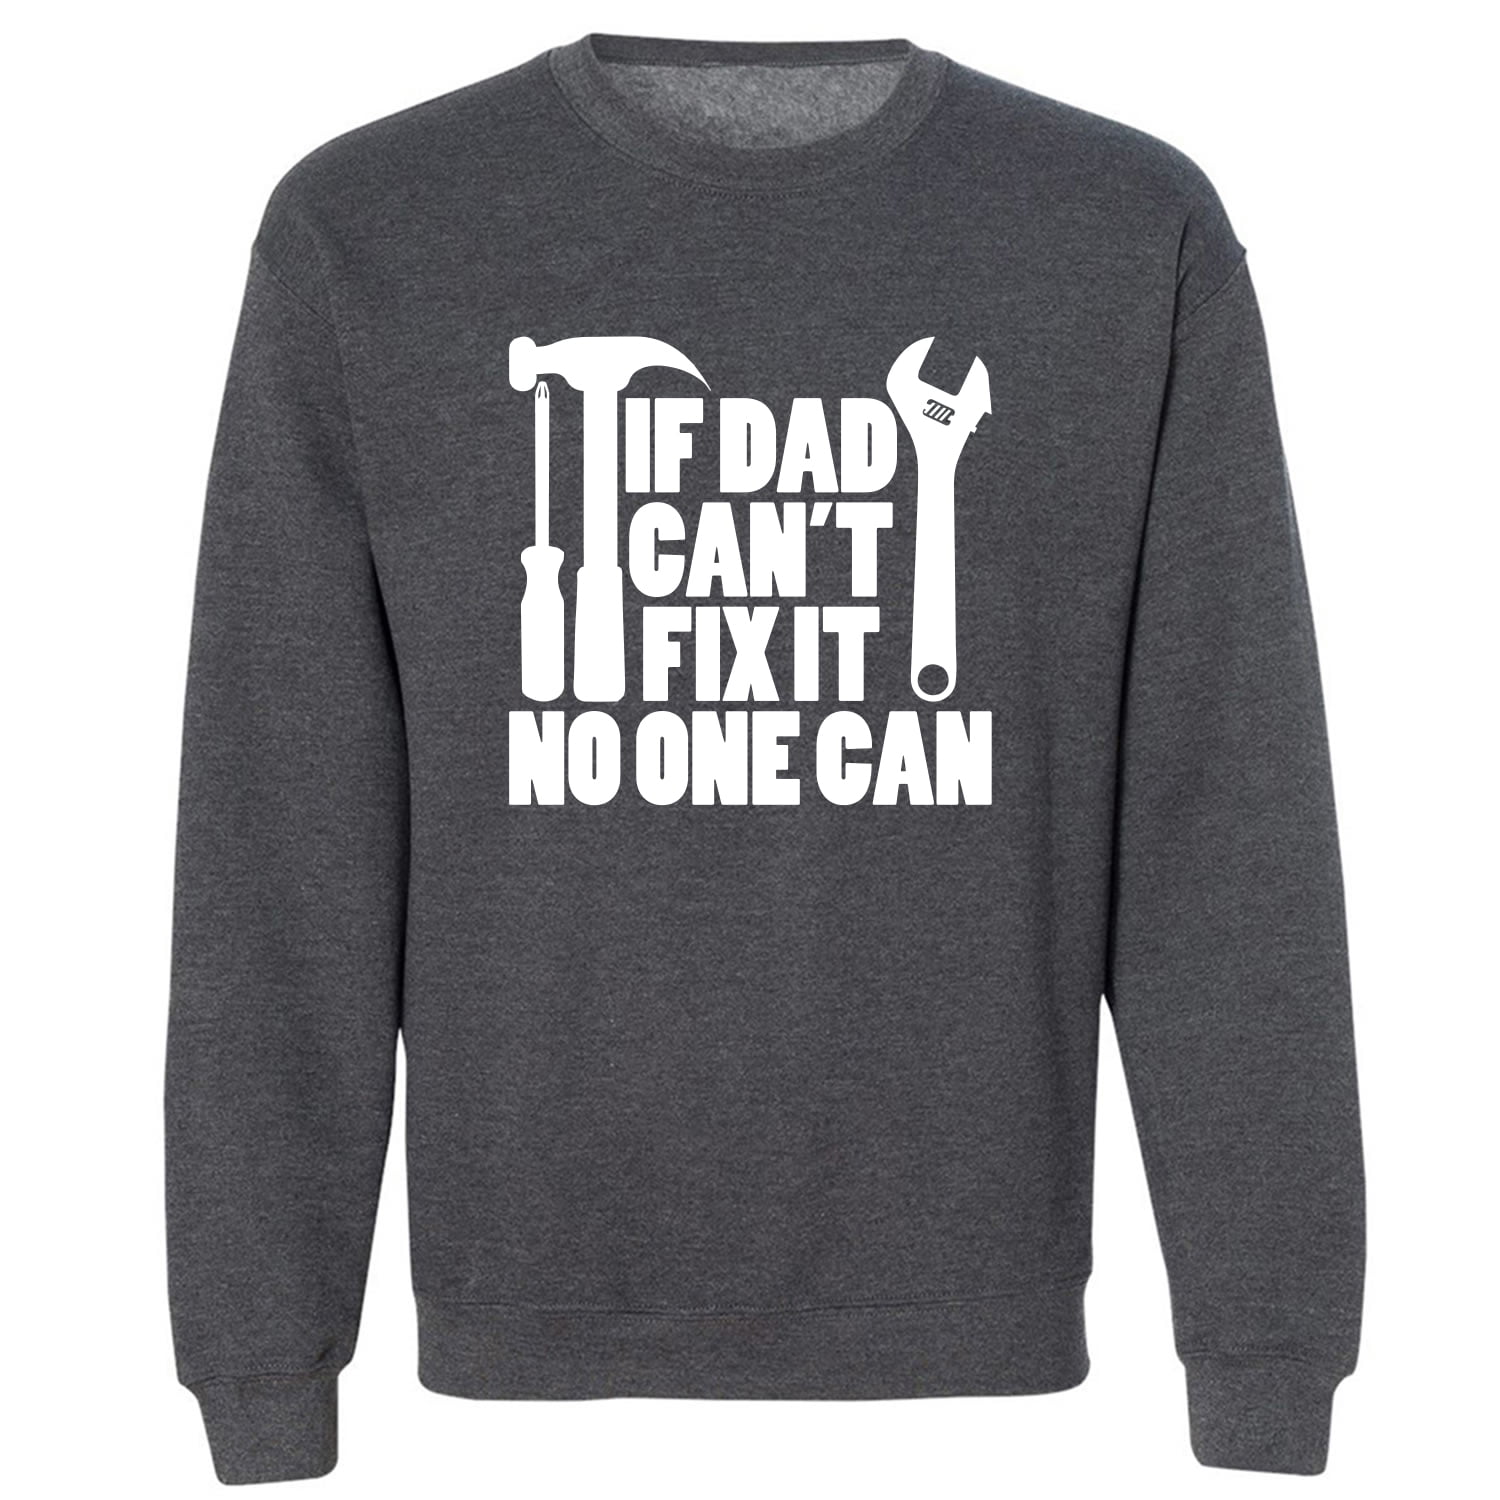 IF DAD Cant FIX IT NO ONE CAN Crewneck Sweatshirt 